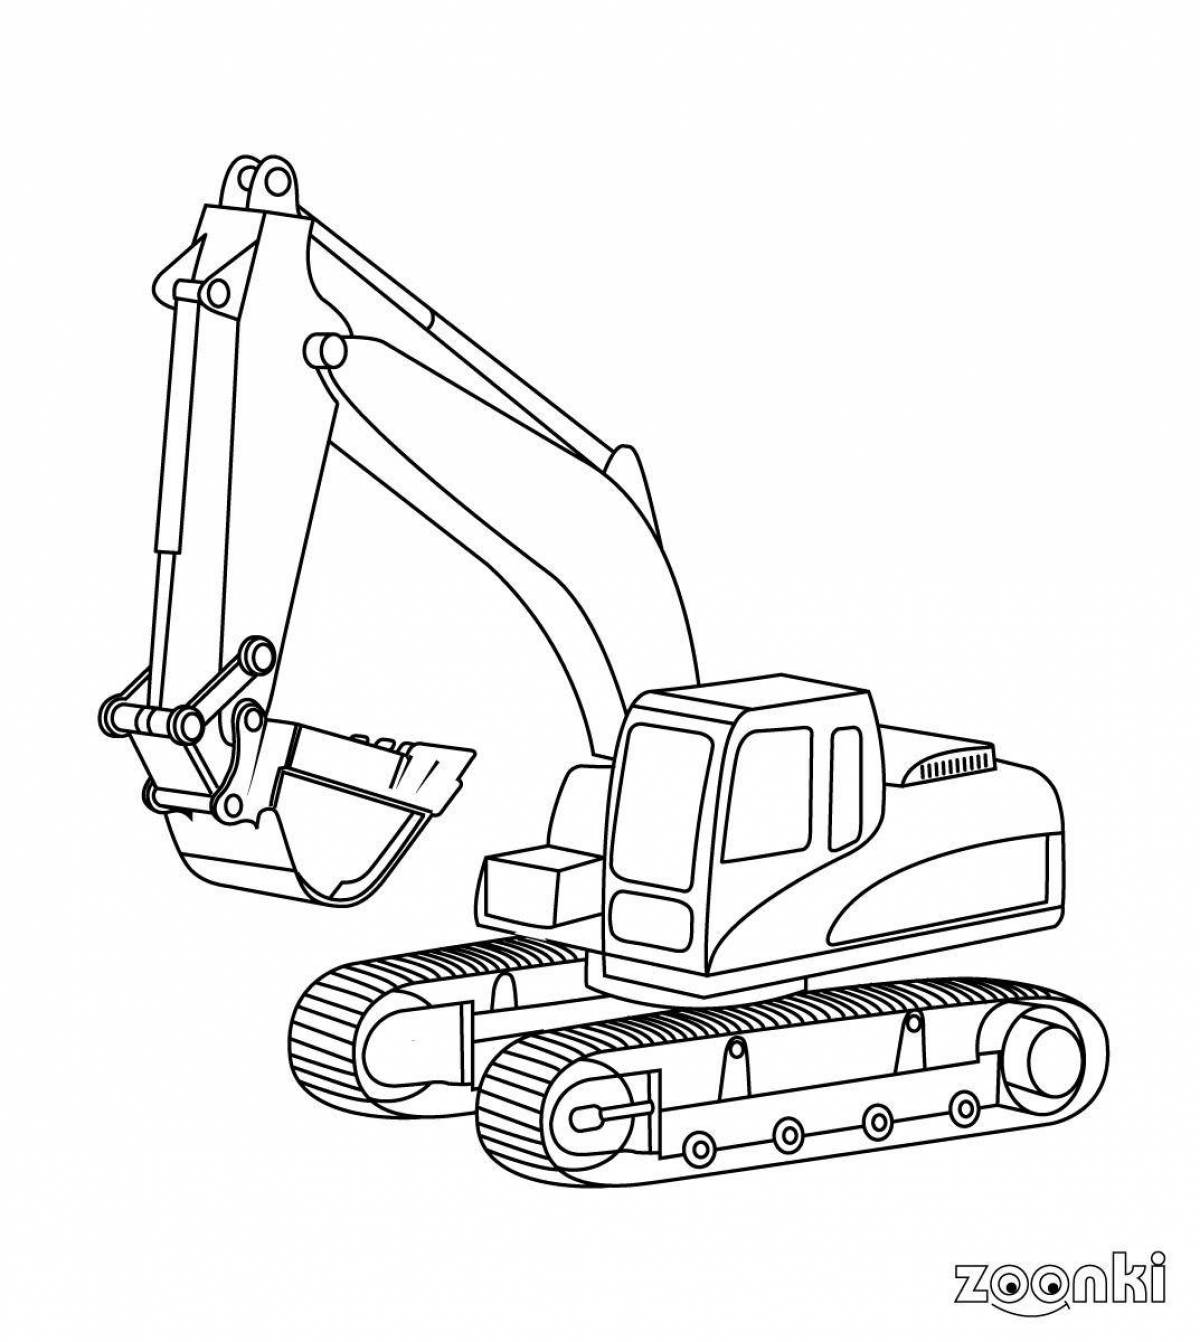 Excavator live coloring for boys